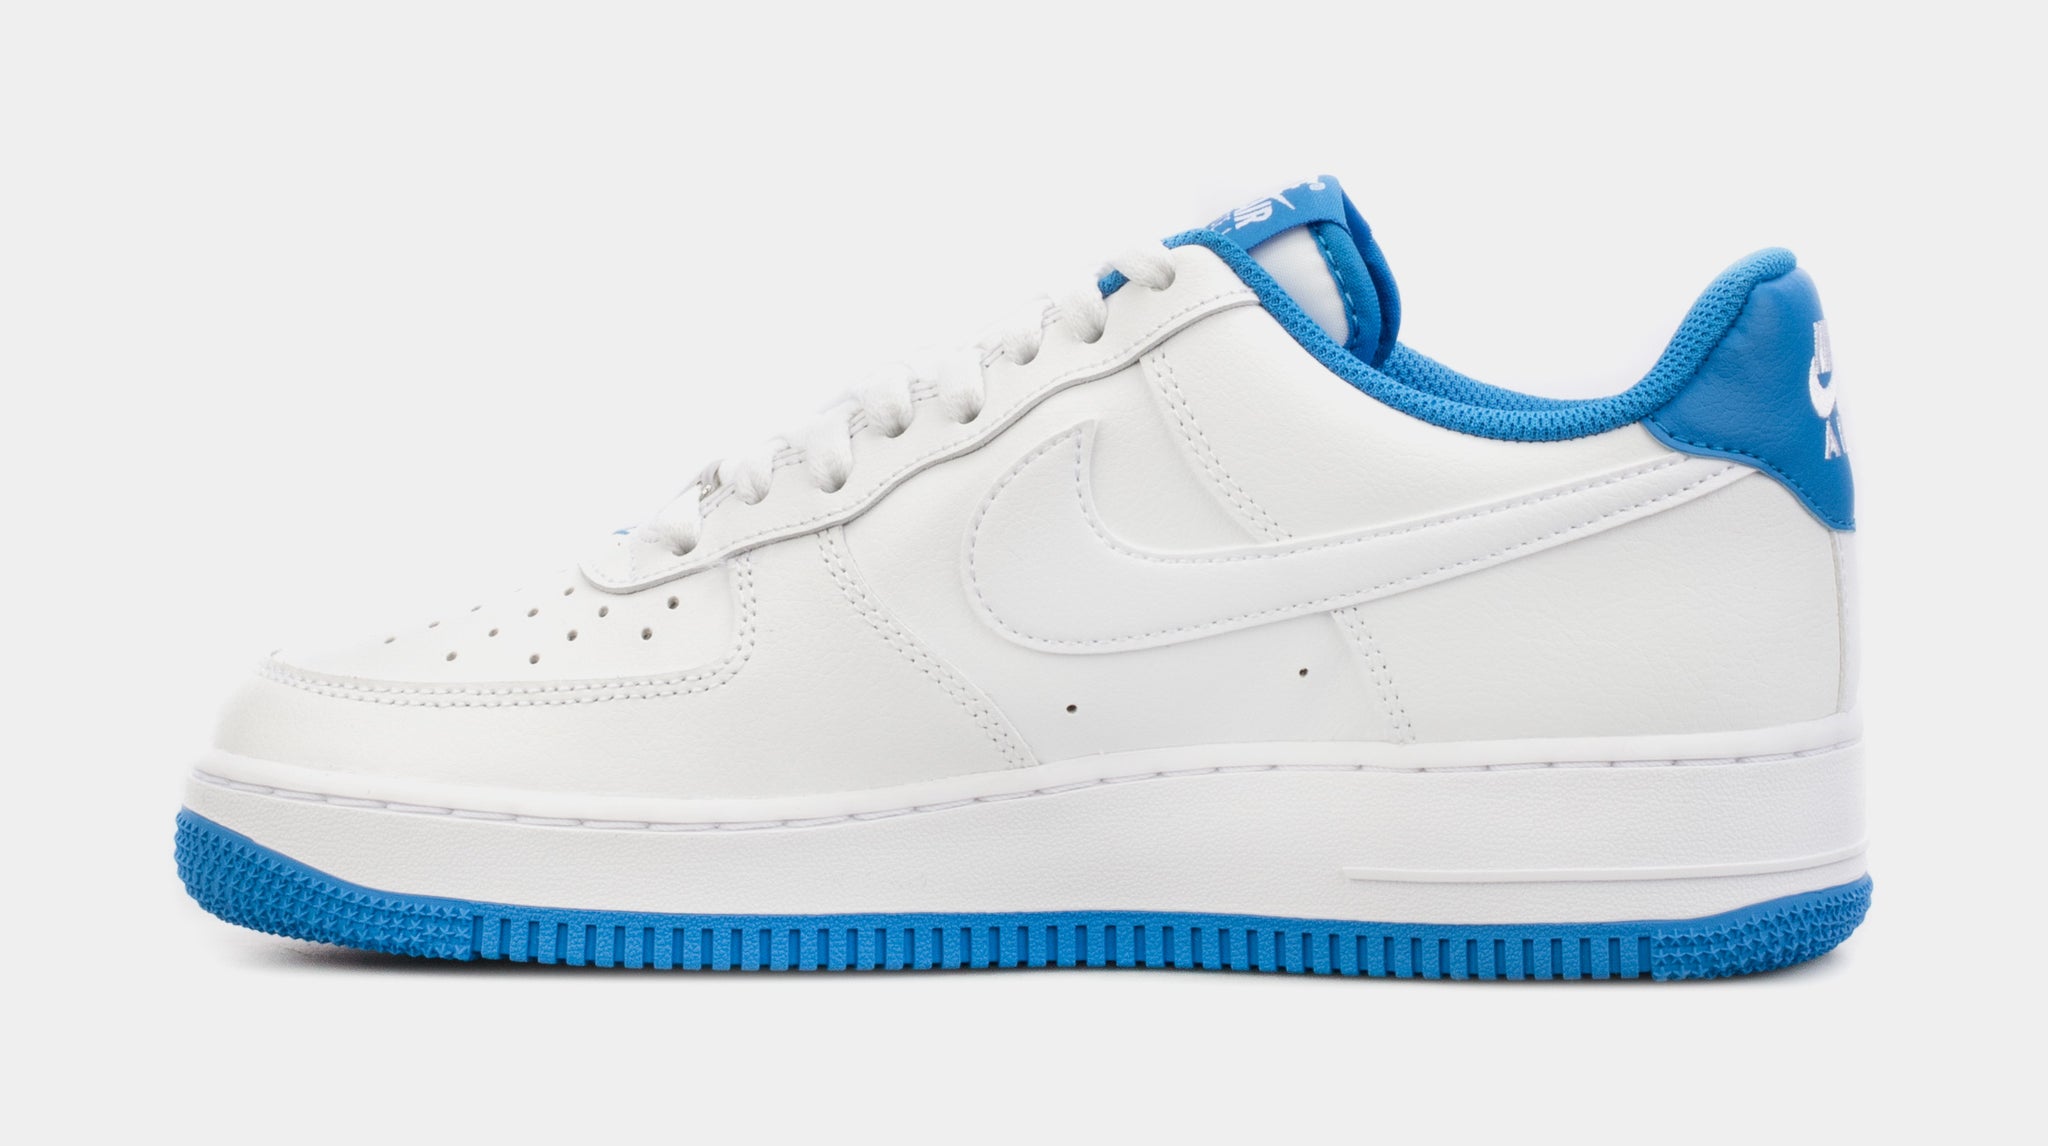 Nike Air Force 1 Low Pronto Blue Mens Lifestyle Shoes White Blue